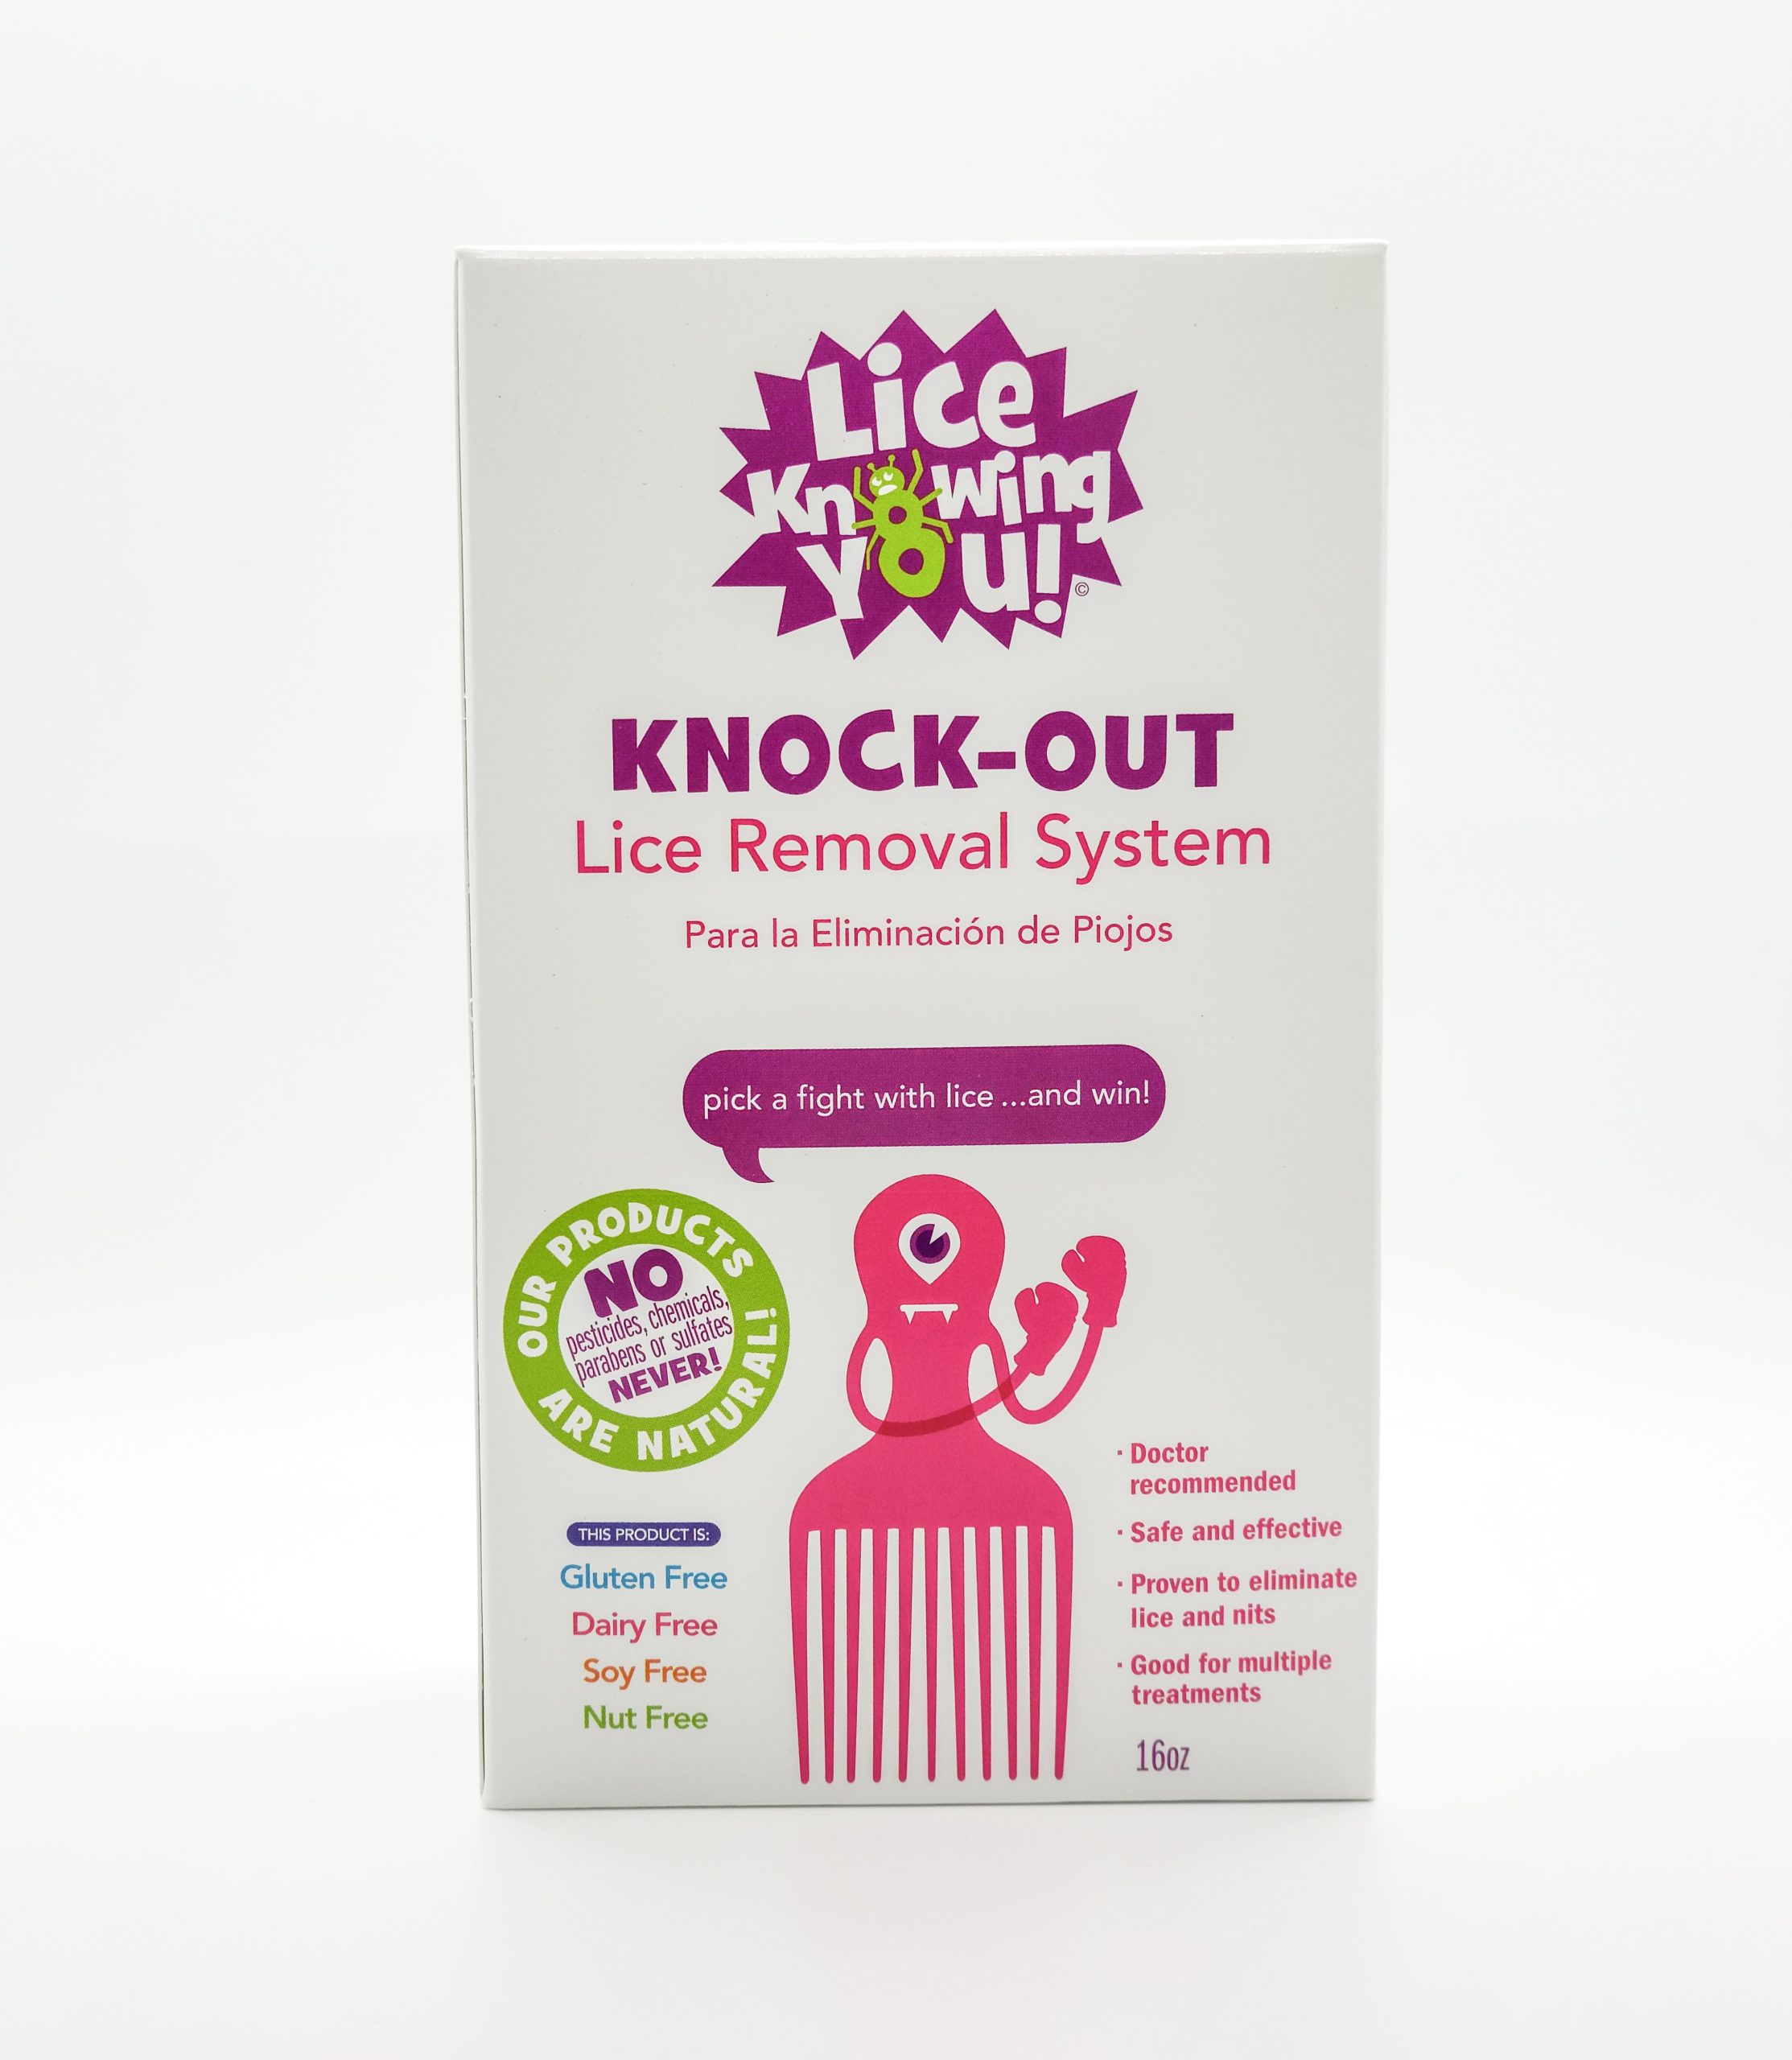 Knock out products